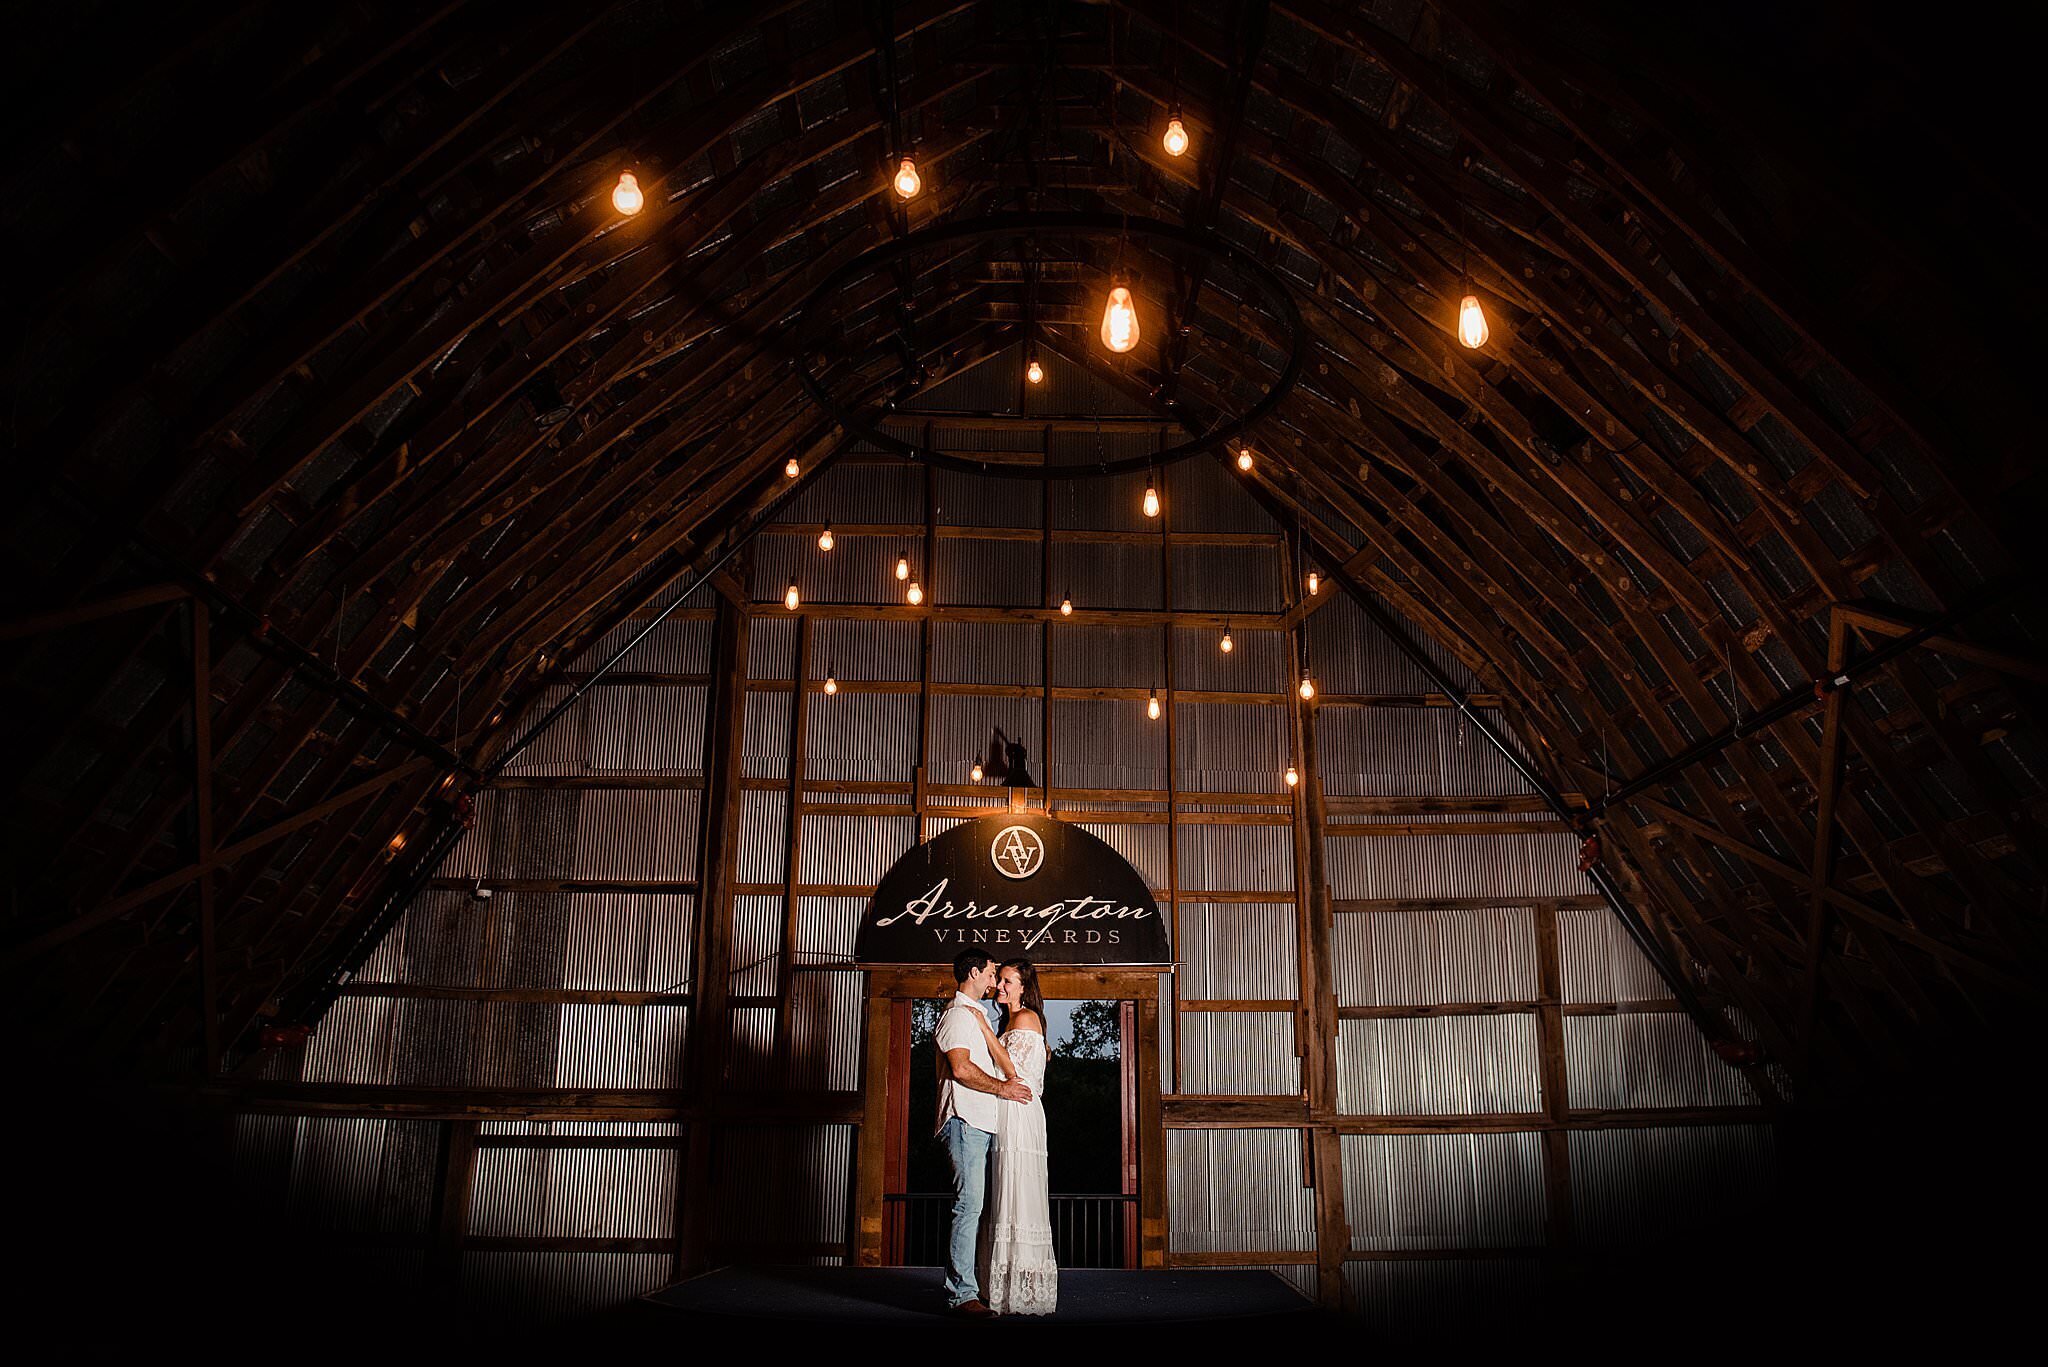 Engaged couple sharing a romantic slow dance on stage in the balcony of the big red barn at Arrington Vineyards, dramatic lighting on them with chandeliers overhead